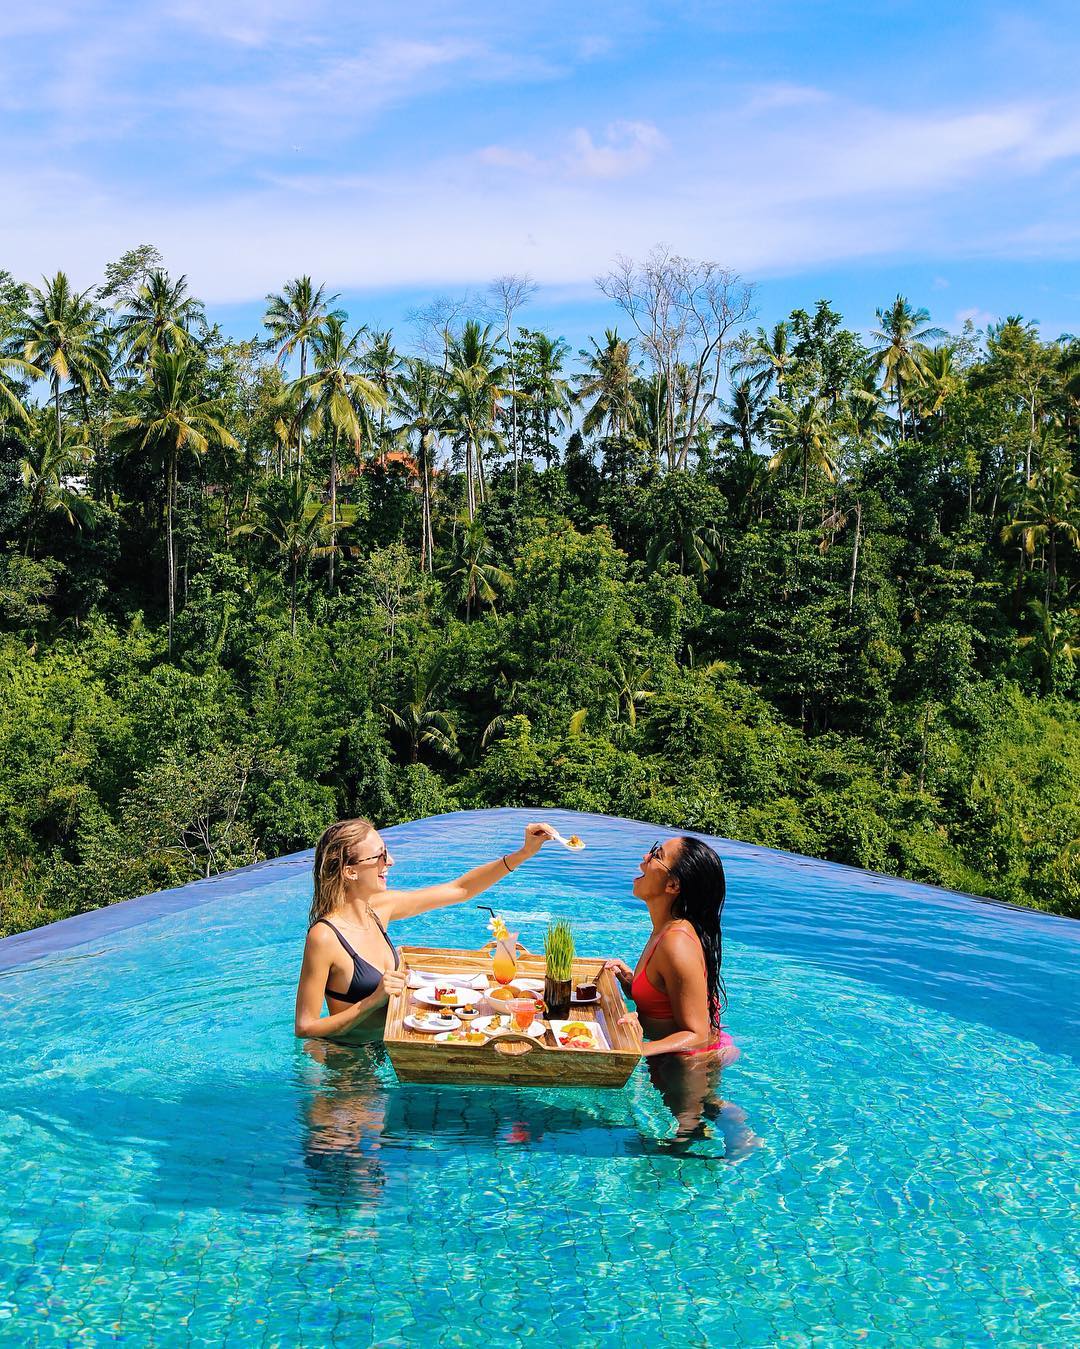 Best Places To Eat In Ubud You Should Try | Bali Weather Forecast and